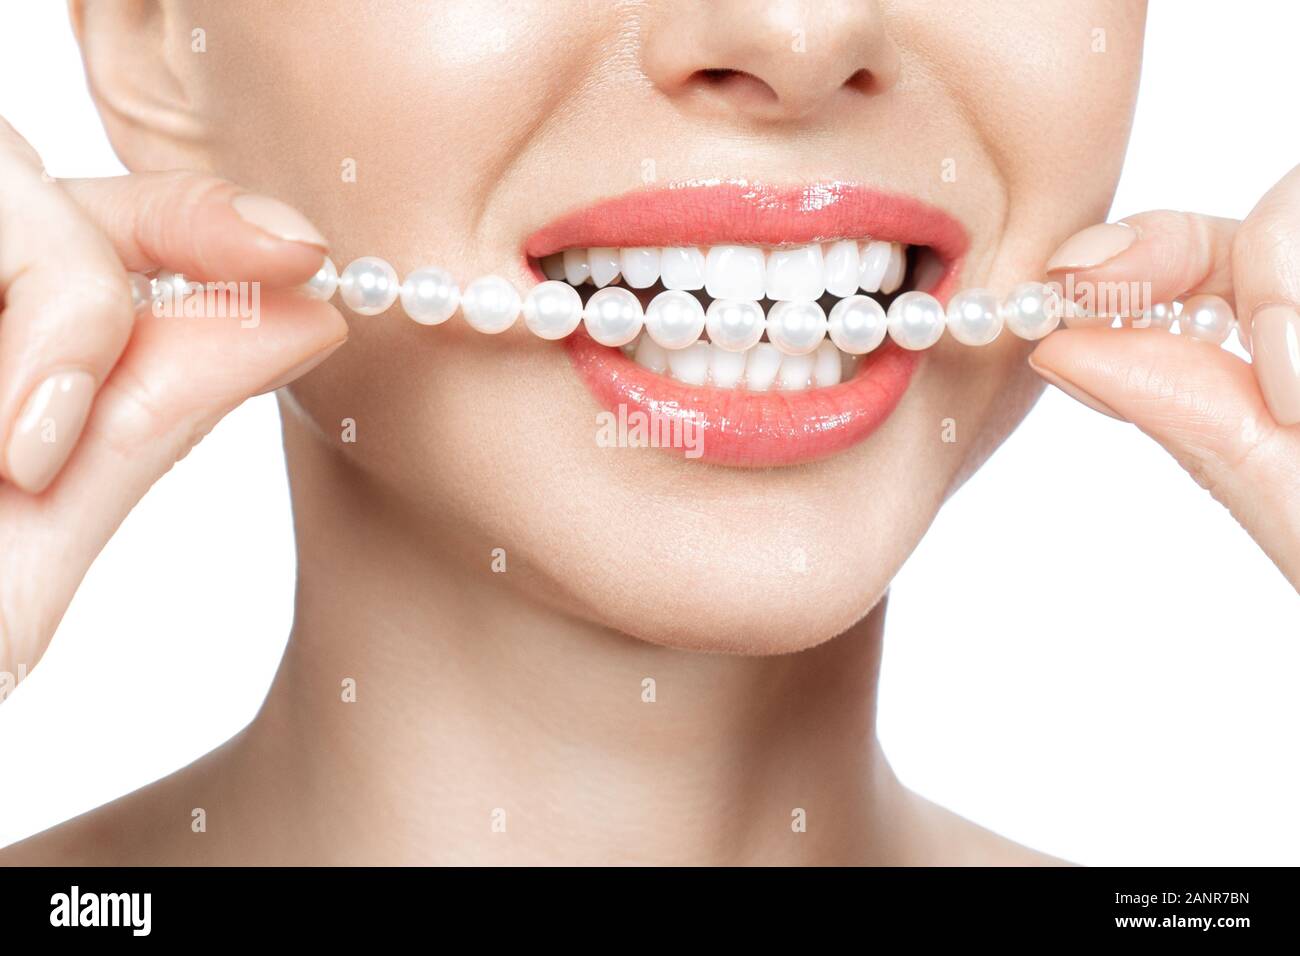 Beautiful female teeth smile and pearl necklace, Dental Health Concept Teeth whitening. Dental clinic patient. Image symbolizes oral care dentistry Stock Photo